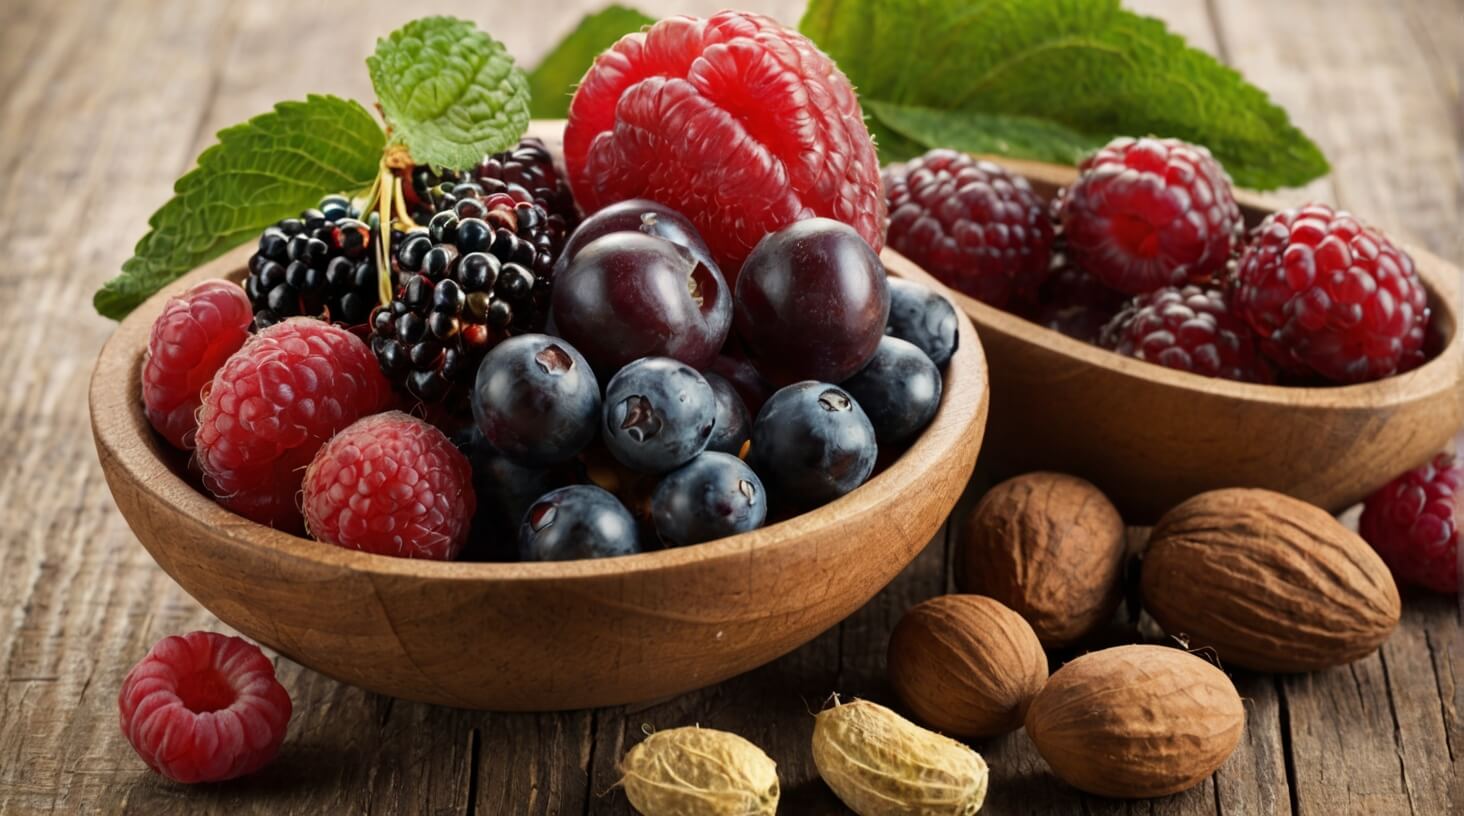 Assorted fruits, vegetables, nuts, and seeds, representing dietary sources of antioxidants.